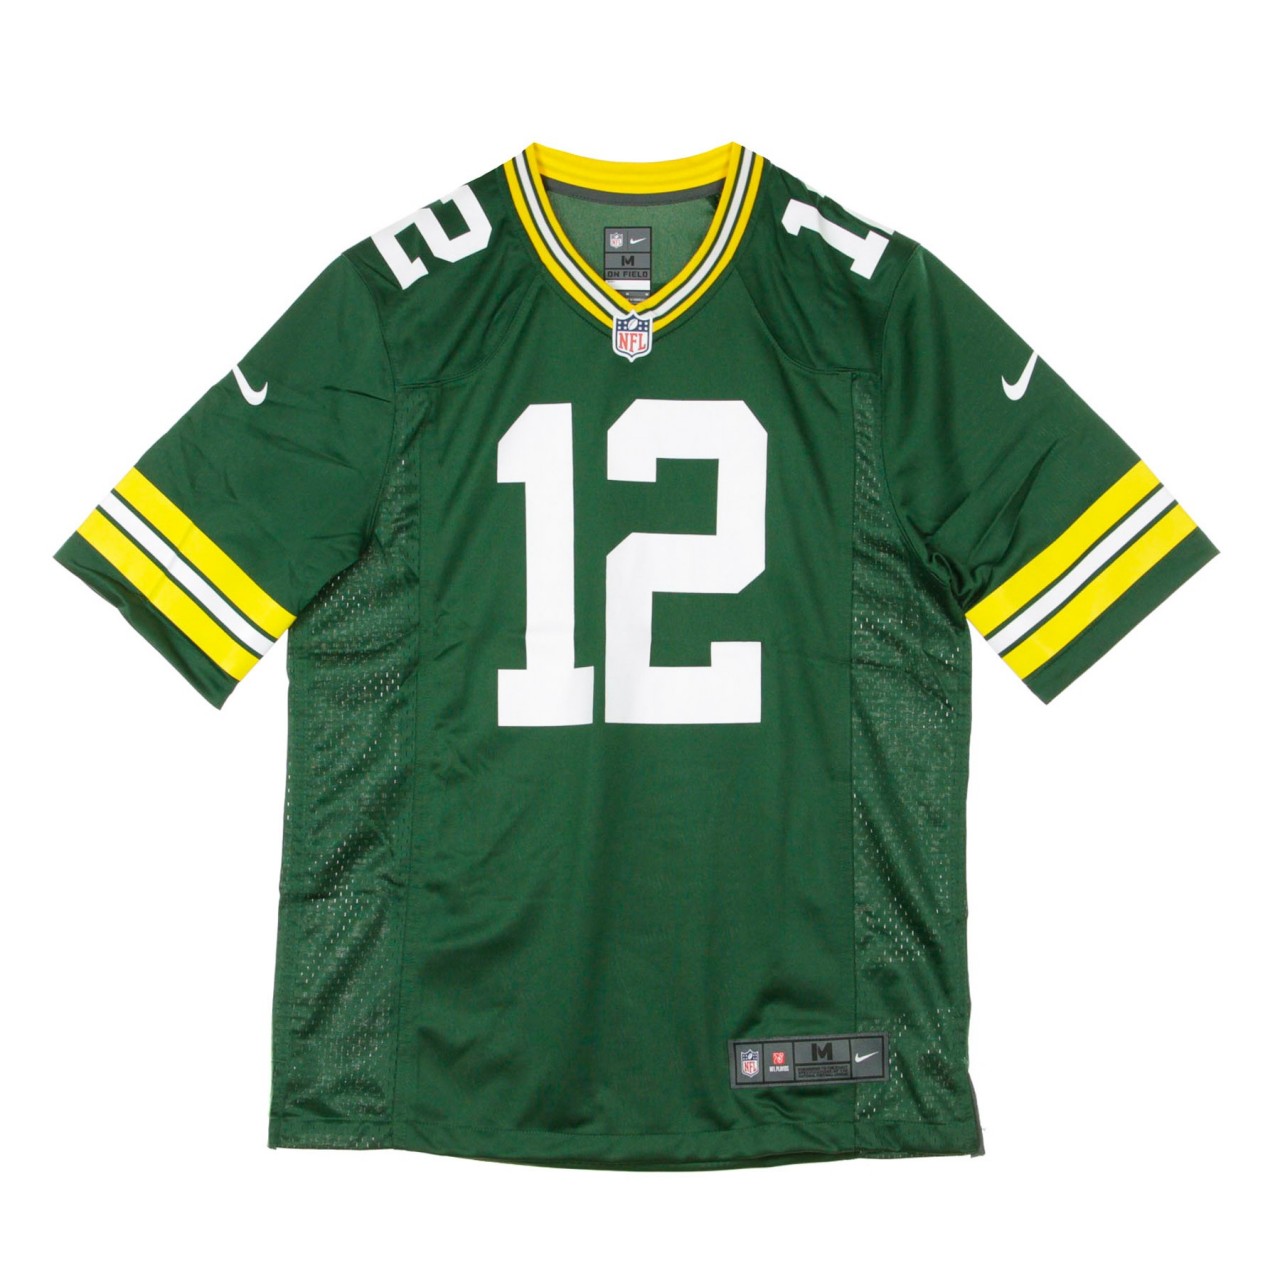 NIKE NFL NFL GAME TEAM COLOUR JERSEY NO 12 RODGERS GREPAC 67NM-GPGH-7TF-2NA:261